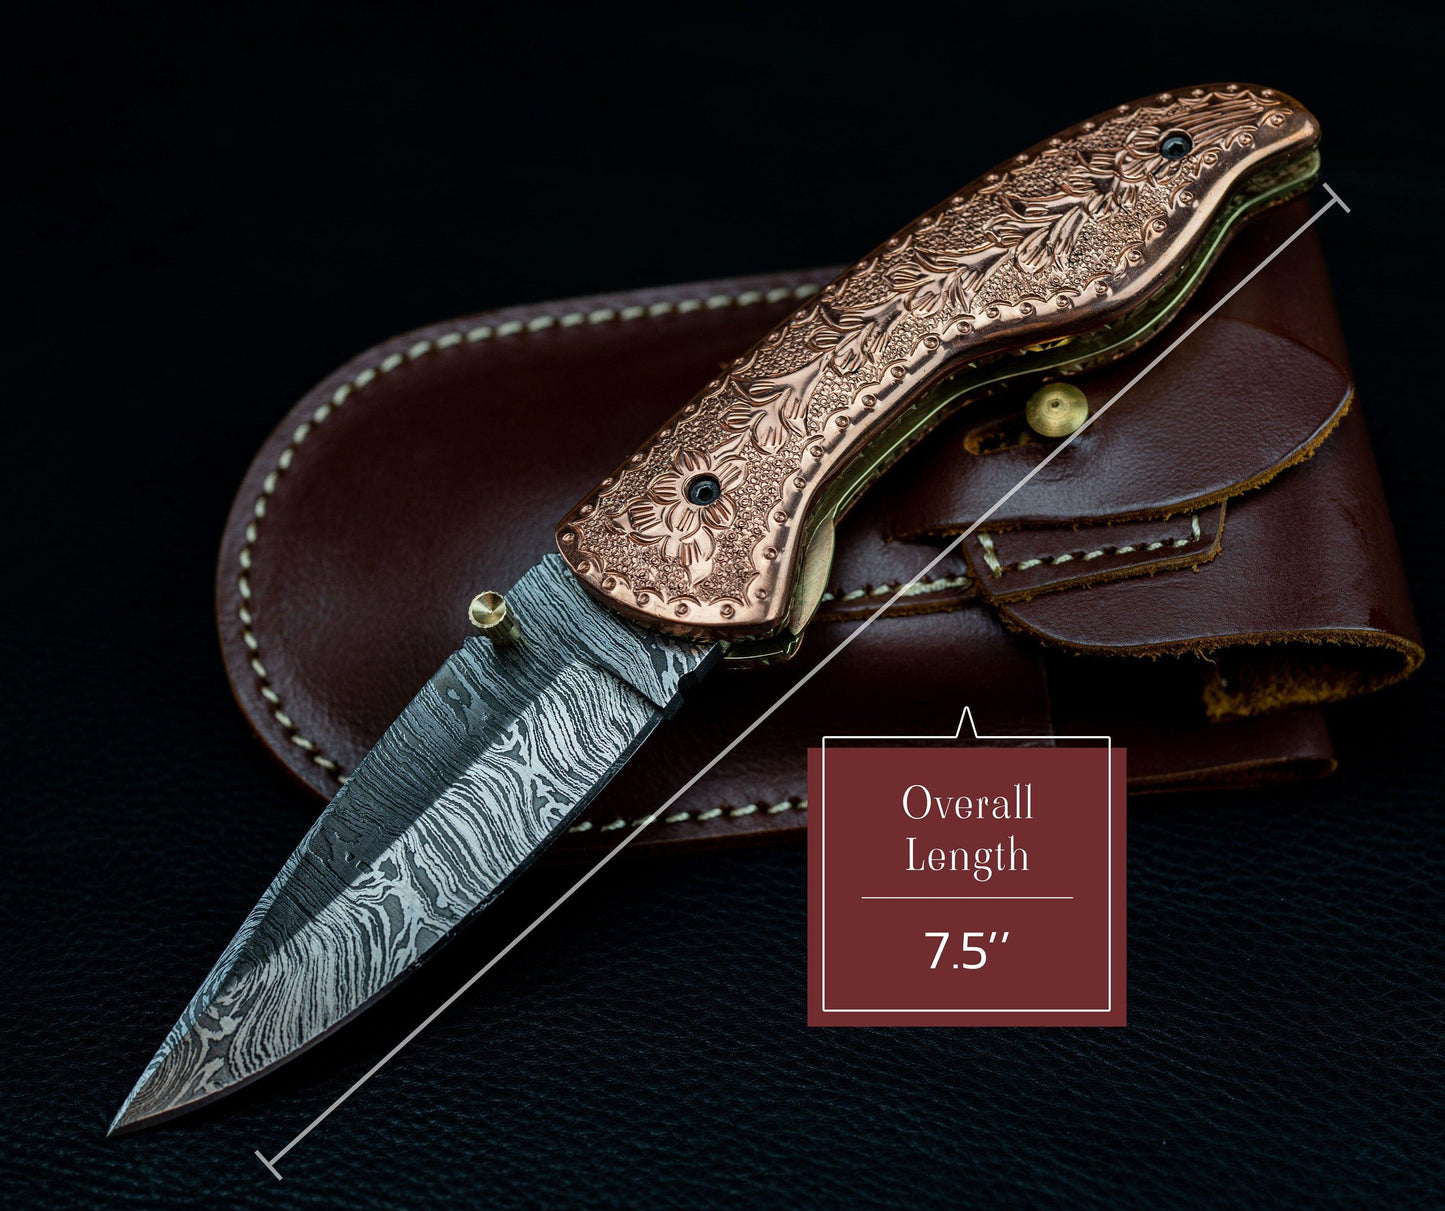 7.5" Hand Forged Engraved Copper Handle Damascus Fold Knife,Hand Made Damascus Pocket Knife, Damascus Steel Hunting knife, Folding Knife 